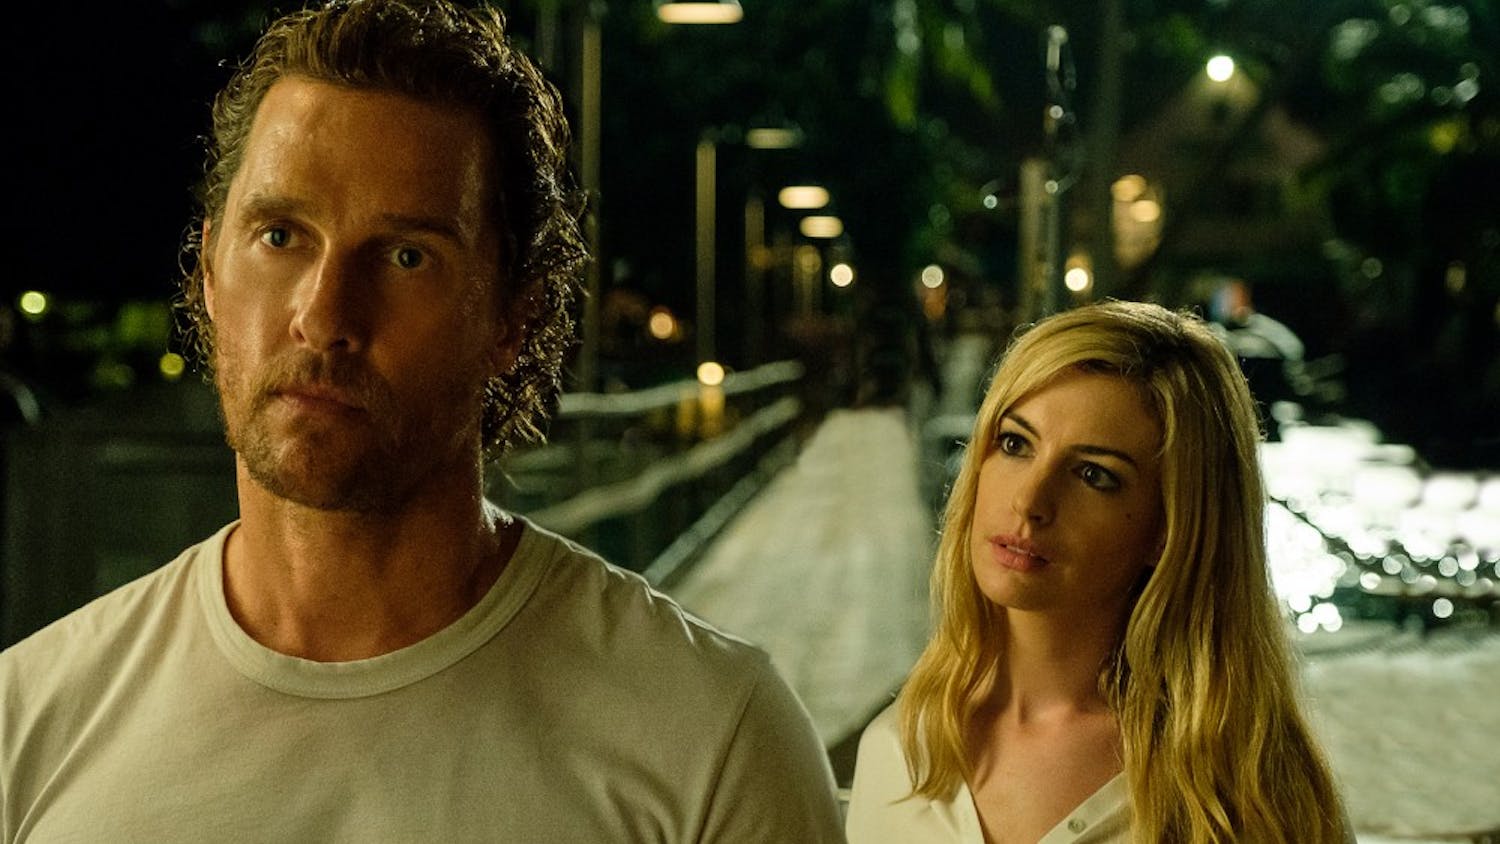 Matthew McConaughey and Anne Hathaway star as Baker and Karen in "Serenity"&nbsp;